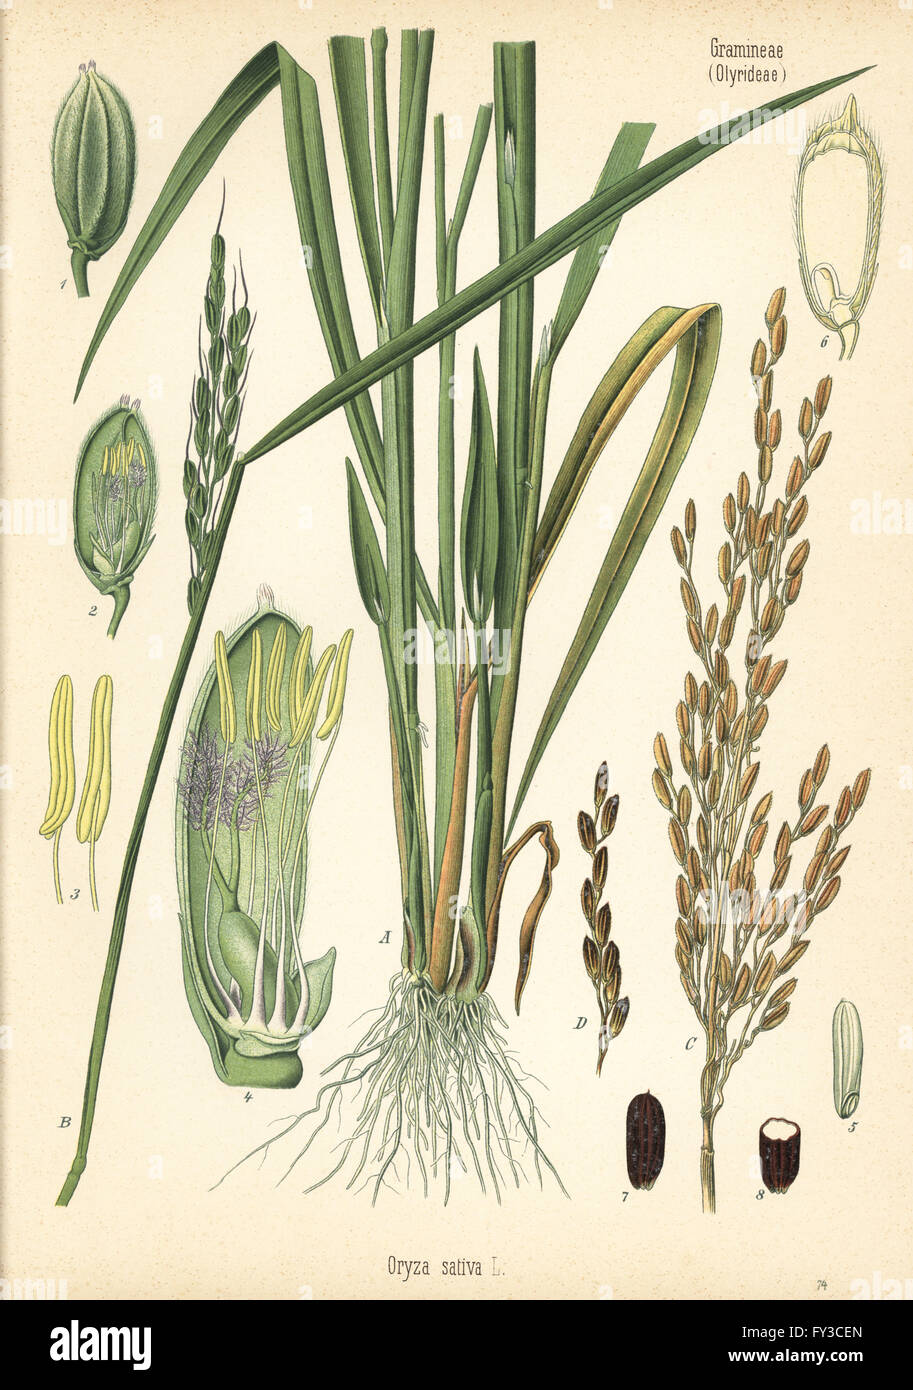 Rice, Oryza sativa. Chromolithograph after a botanical illustration from Hermann Adolph Koehler's Medicinal Plants, edited by Gustav Pabst, Koehler, Germany, 1887. Stock Photo